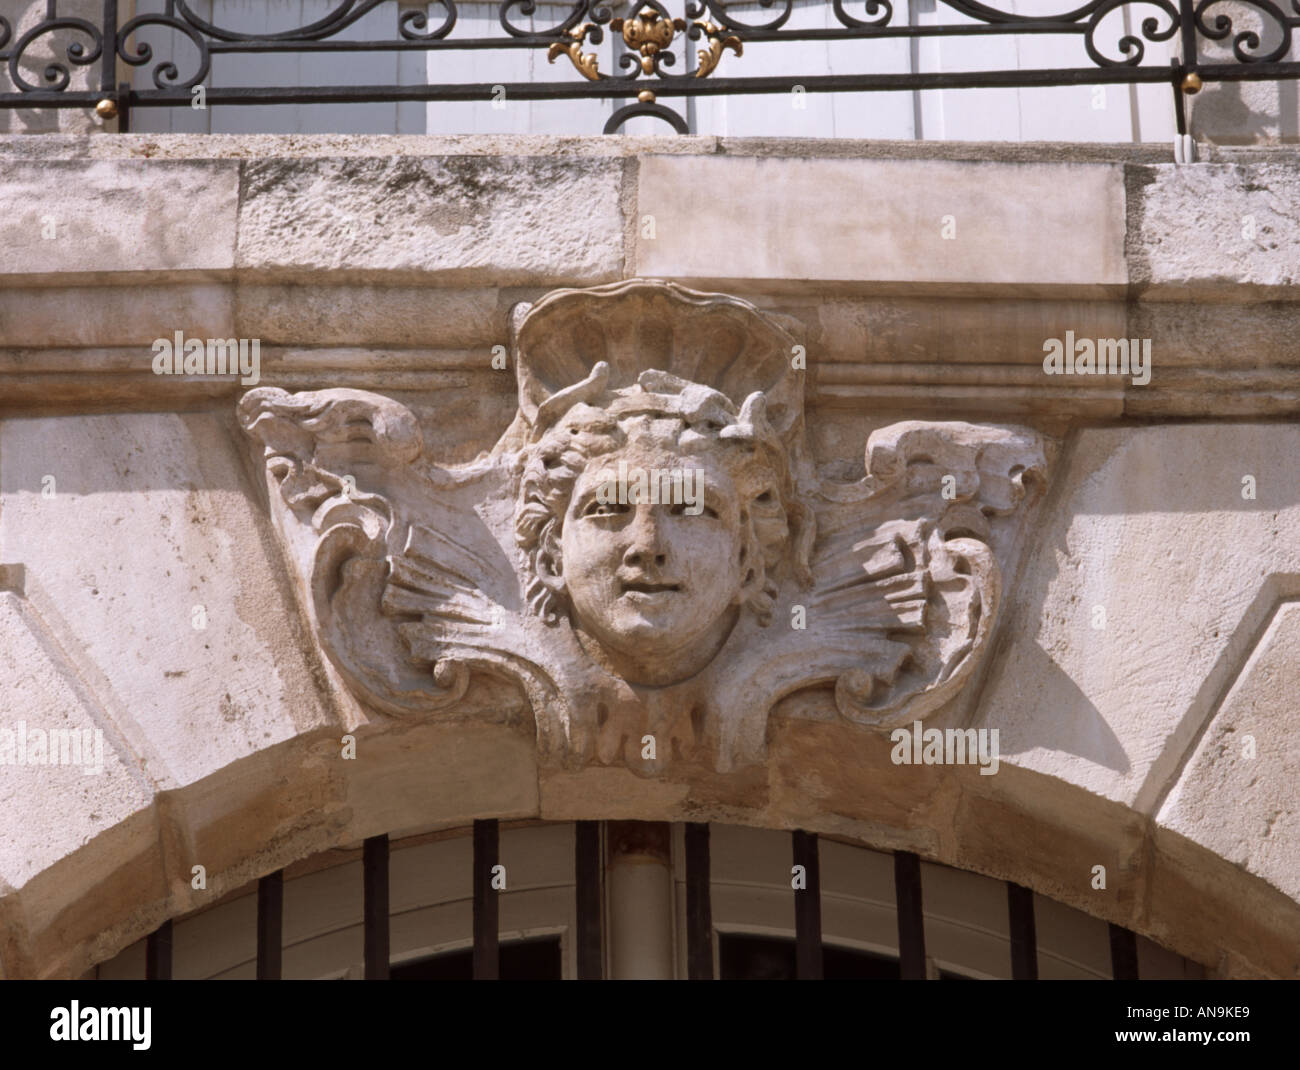 Bordeaux, Aquitaine, France. Place de la Bourse. One of the typical 18thC Mascarons or masks found above on keystones windows in the city Stock Photo